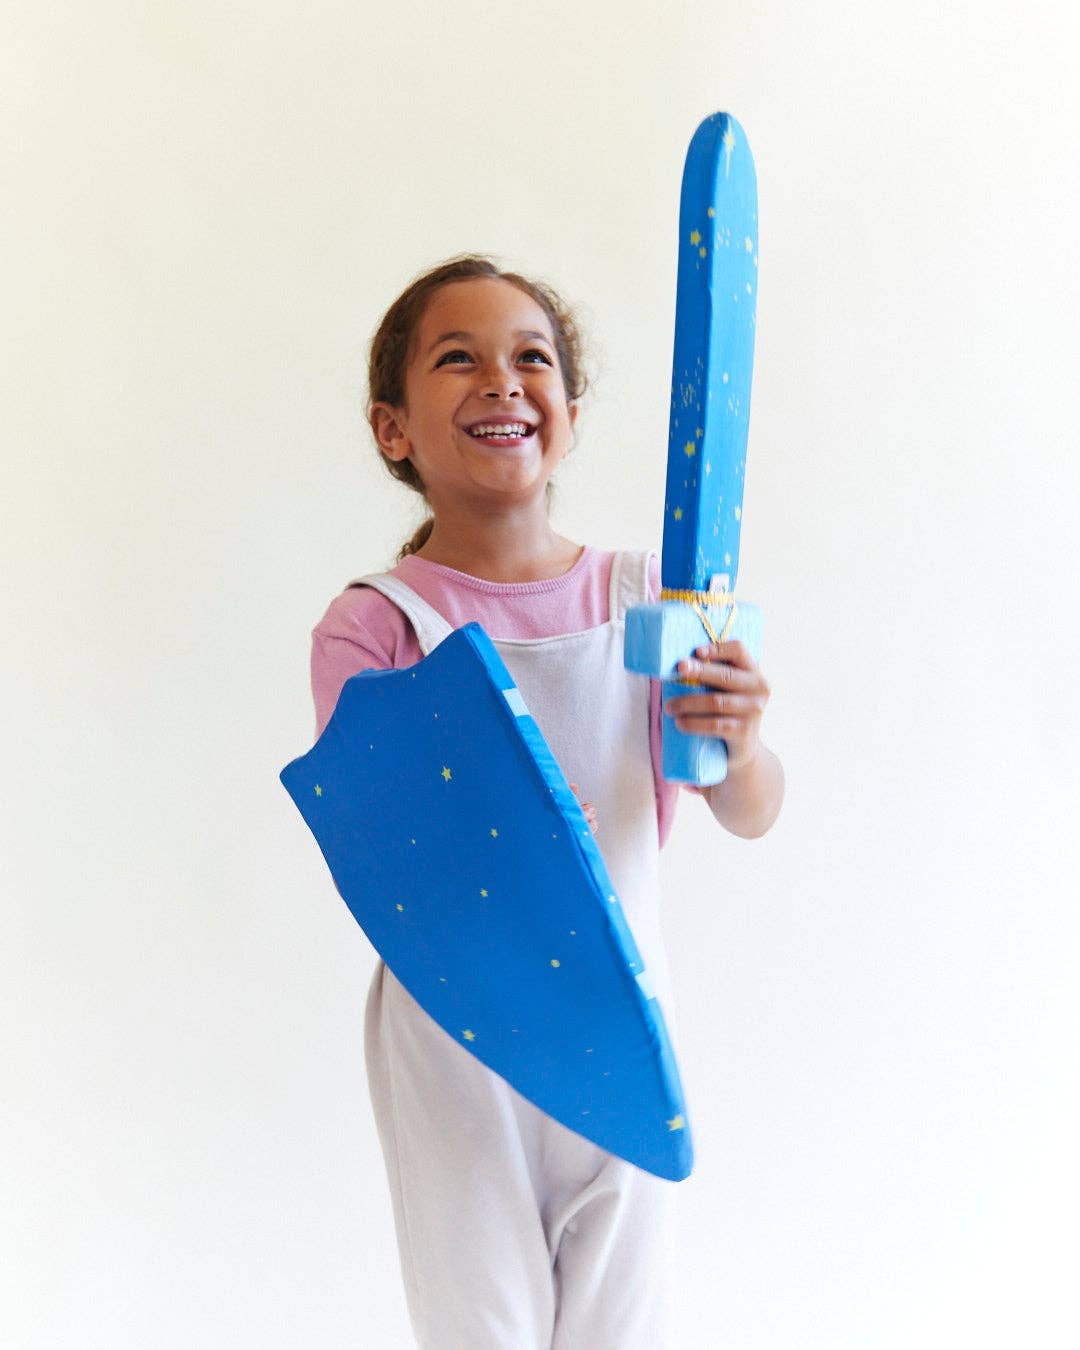 Soft Star Shield for Knight Costume, Pretend Play